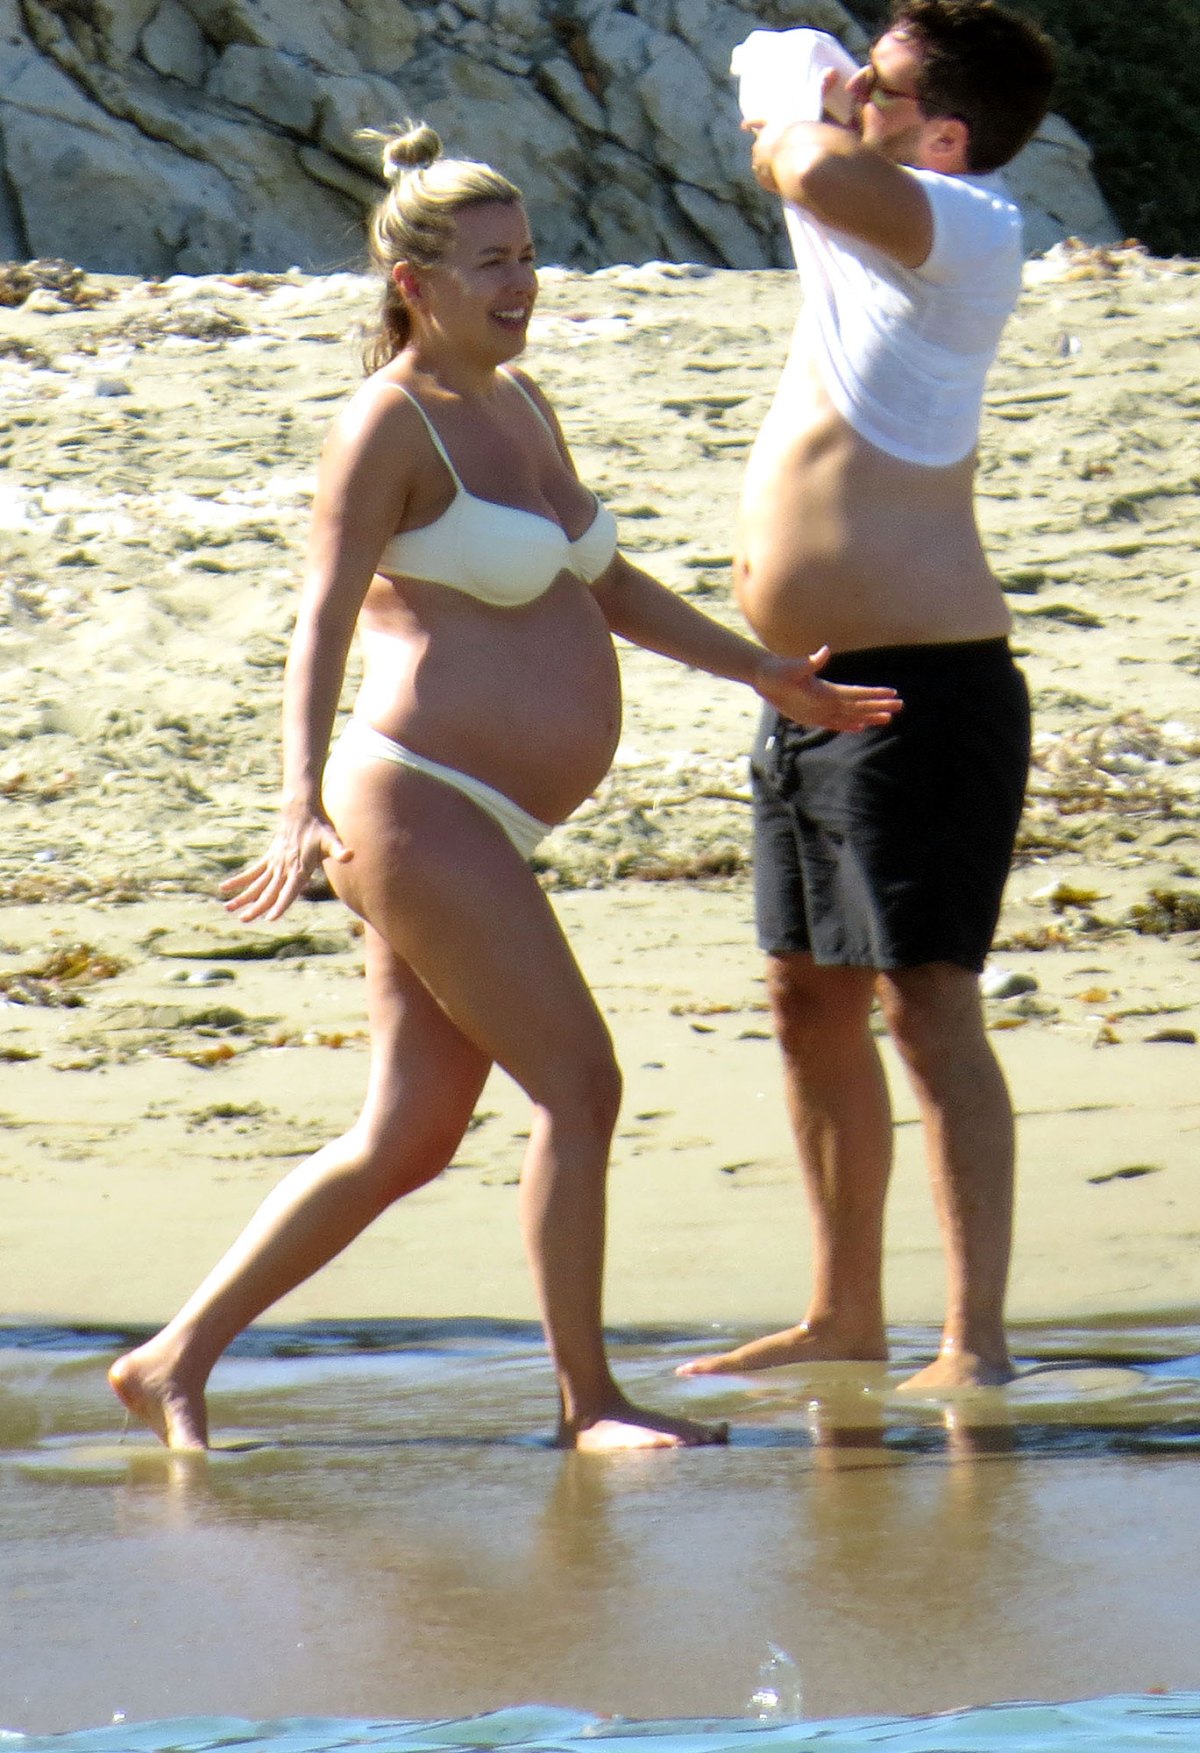 Candid Topless Beach Holiday - Pregnant Katy Perry Shows Baby Bump at Beach With Friends: Pics